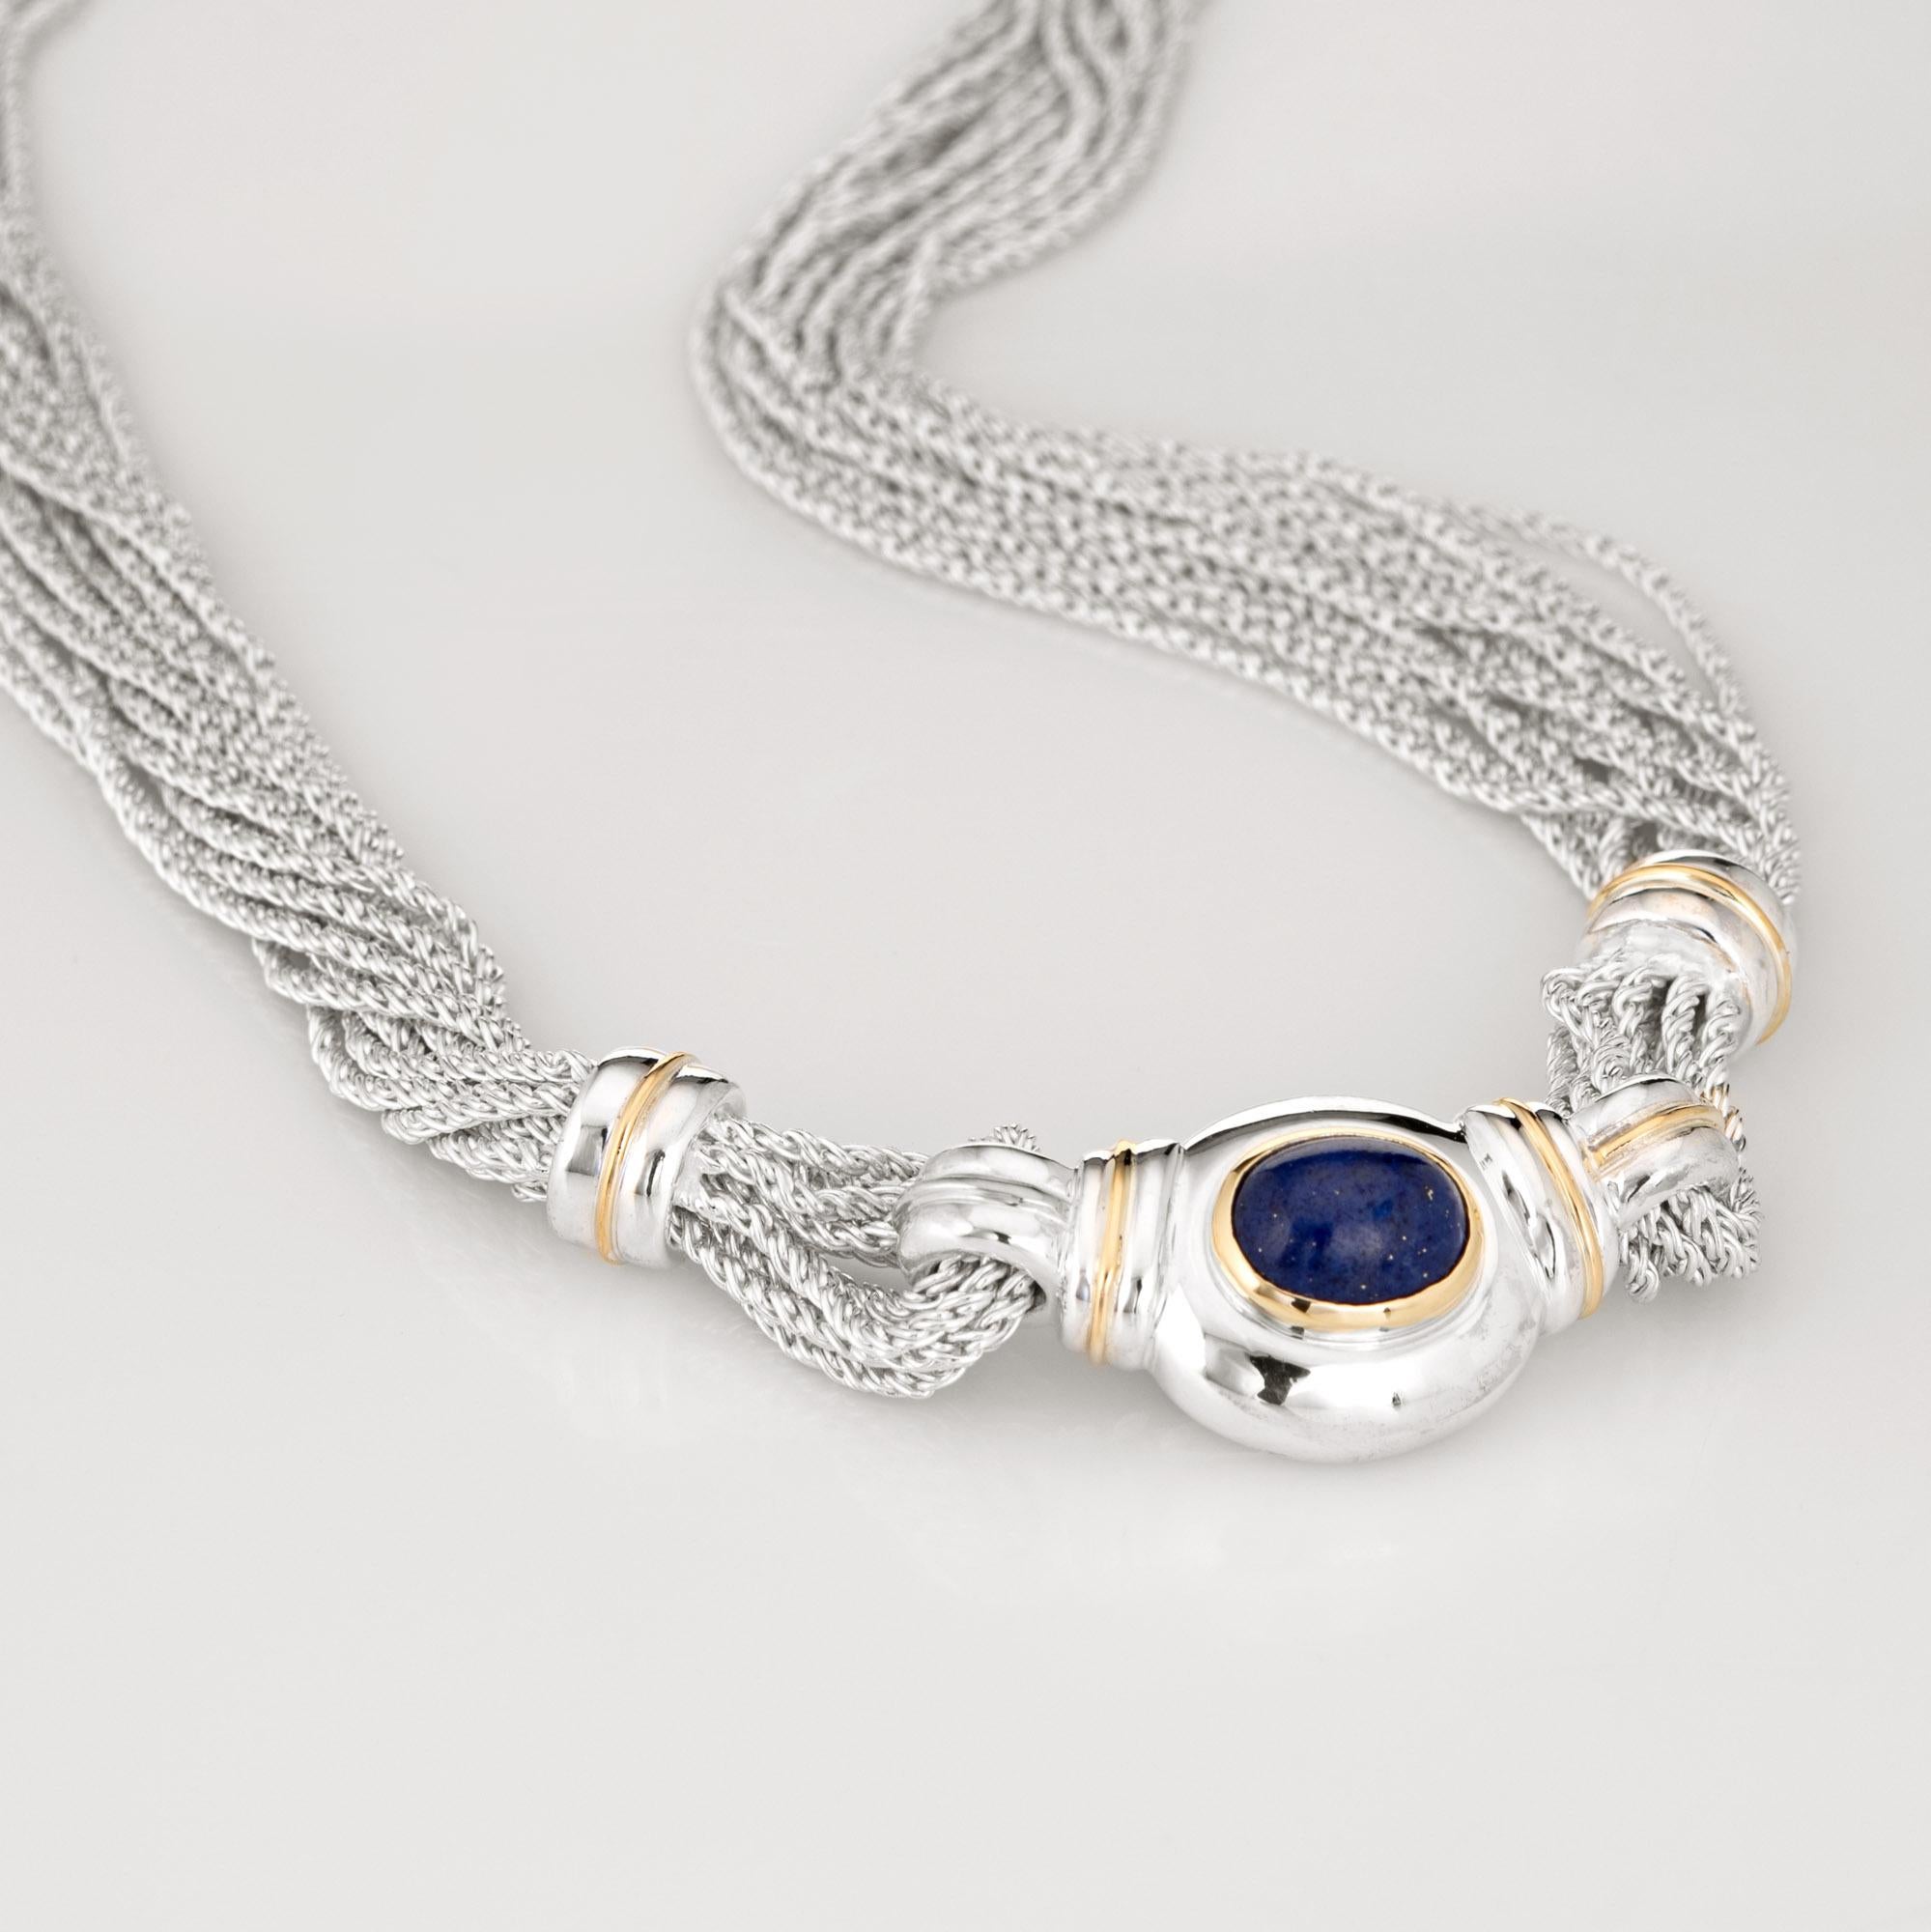 Elegant and finely detailed vintage Tiffany & Co lapis lazuli multi strand necklace, crafted in sterling silver and 18 karat yellow gold (circa 1990s).  

Lapis lazuli cabochon measures 10mm x 8mm. The lapis is in very good condition and free of